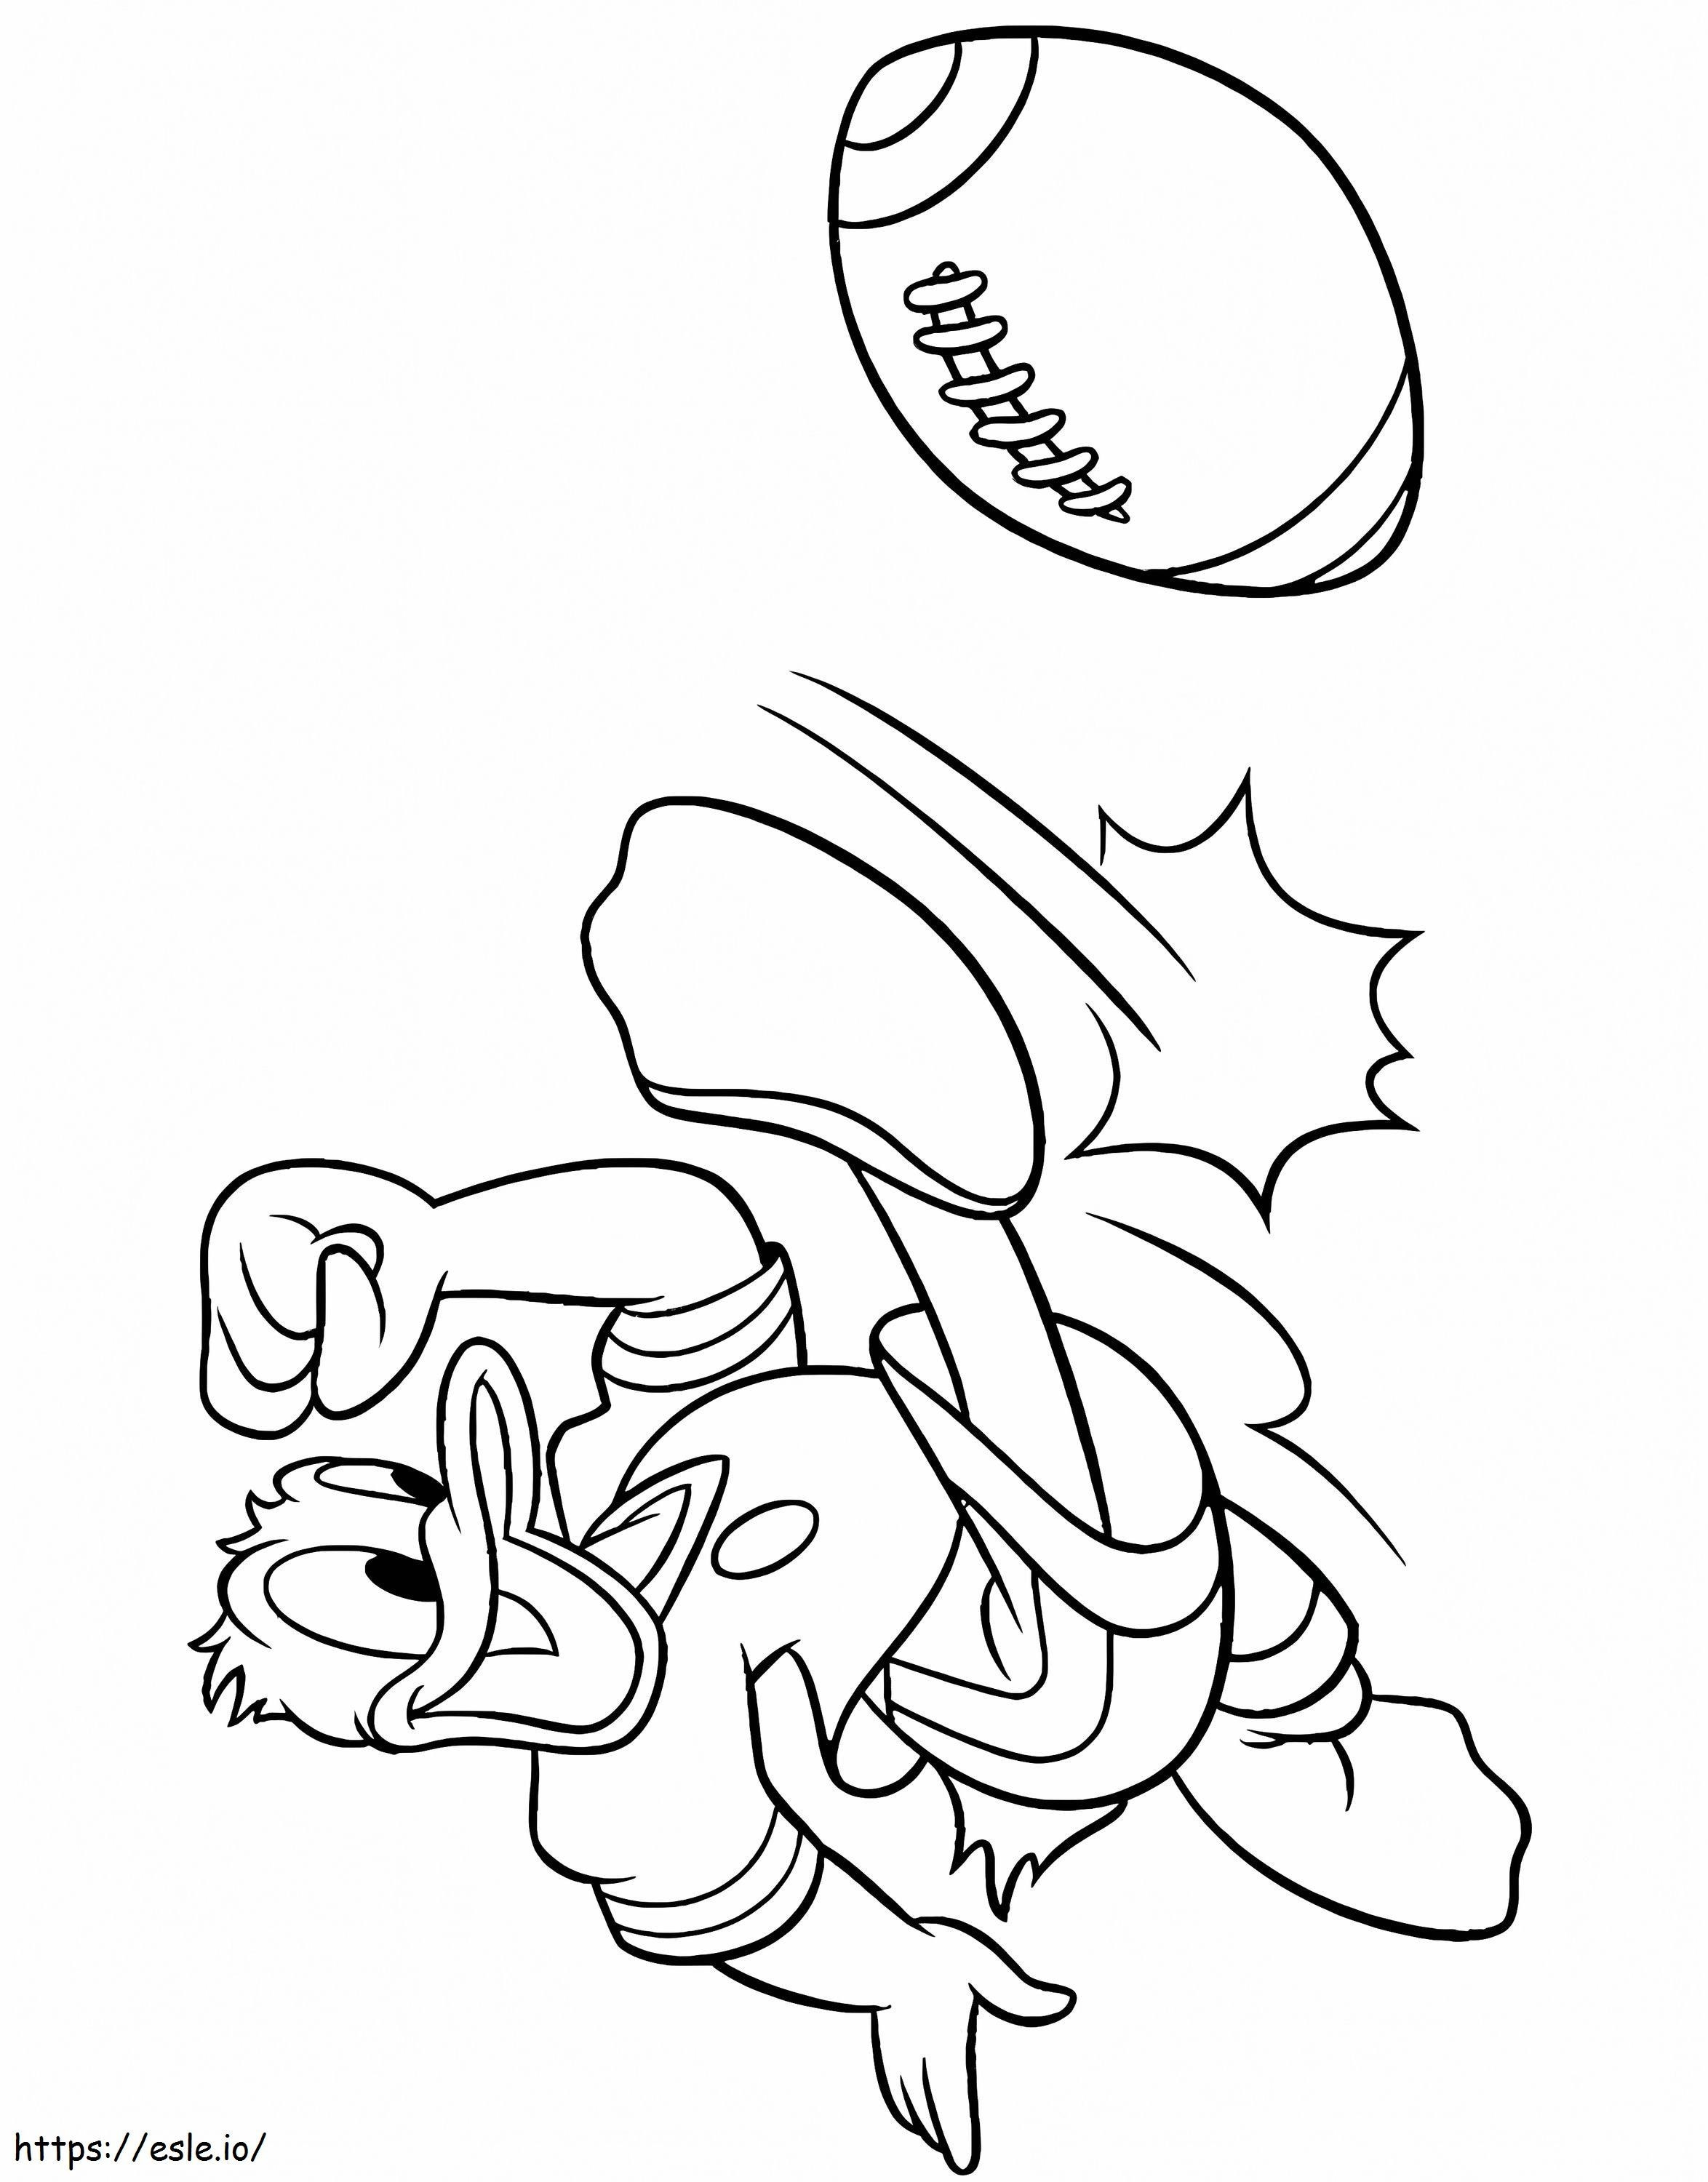 Donald With Football coloring page